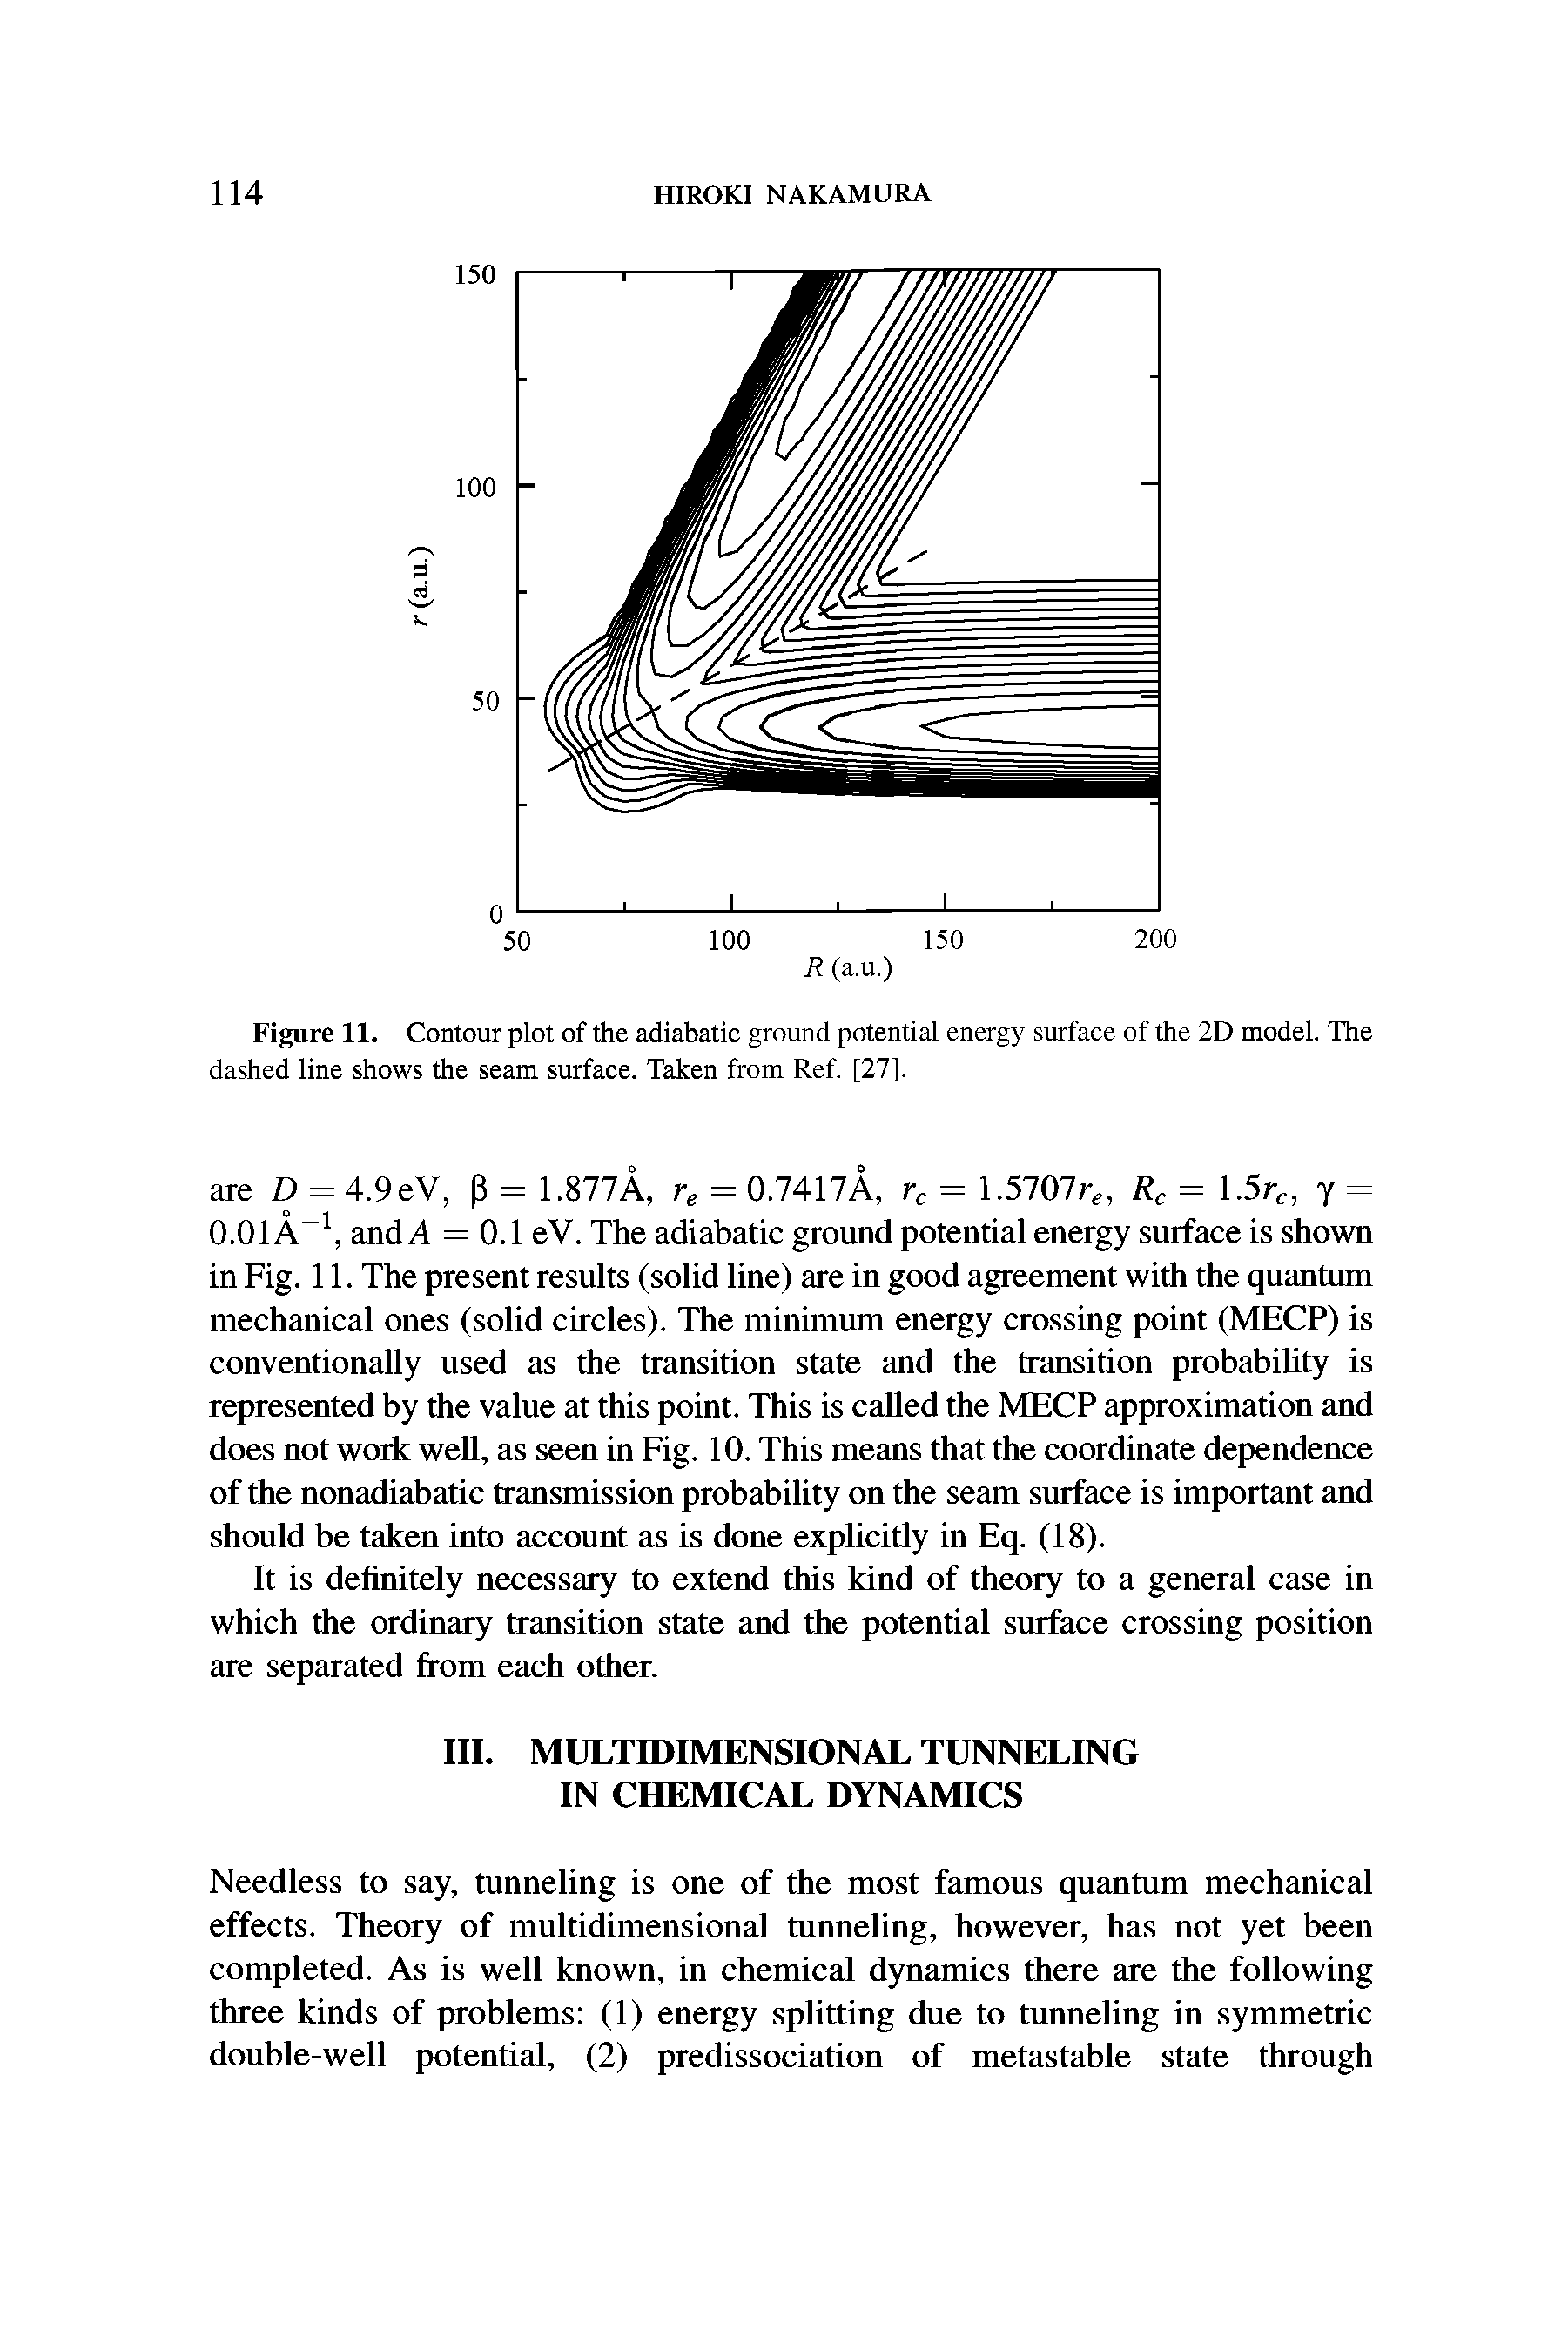 Figure 11. Contour plot of the adiabatic ground potential energy surface of the 2D model. The dashed line shows the seam surface. Taken from Ref. [27].